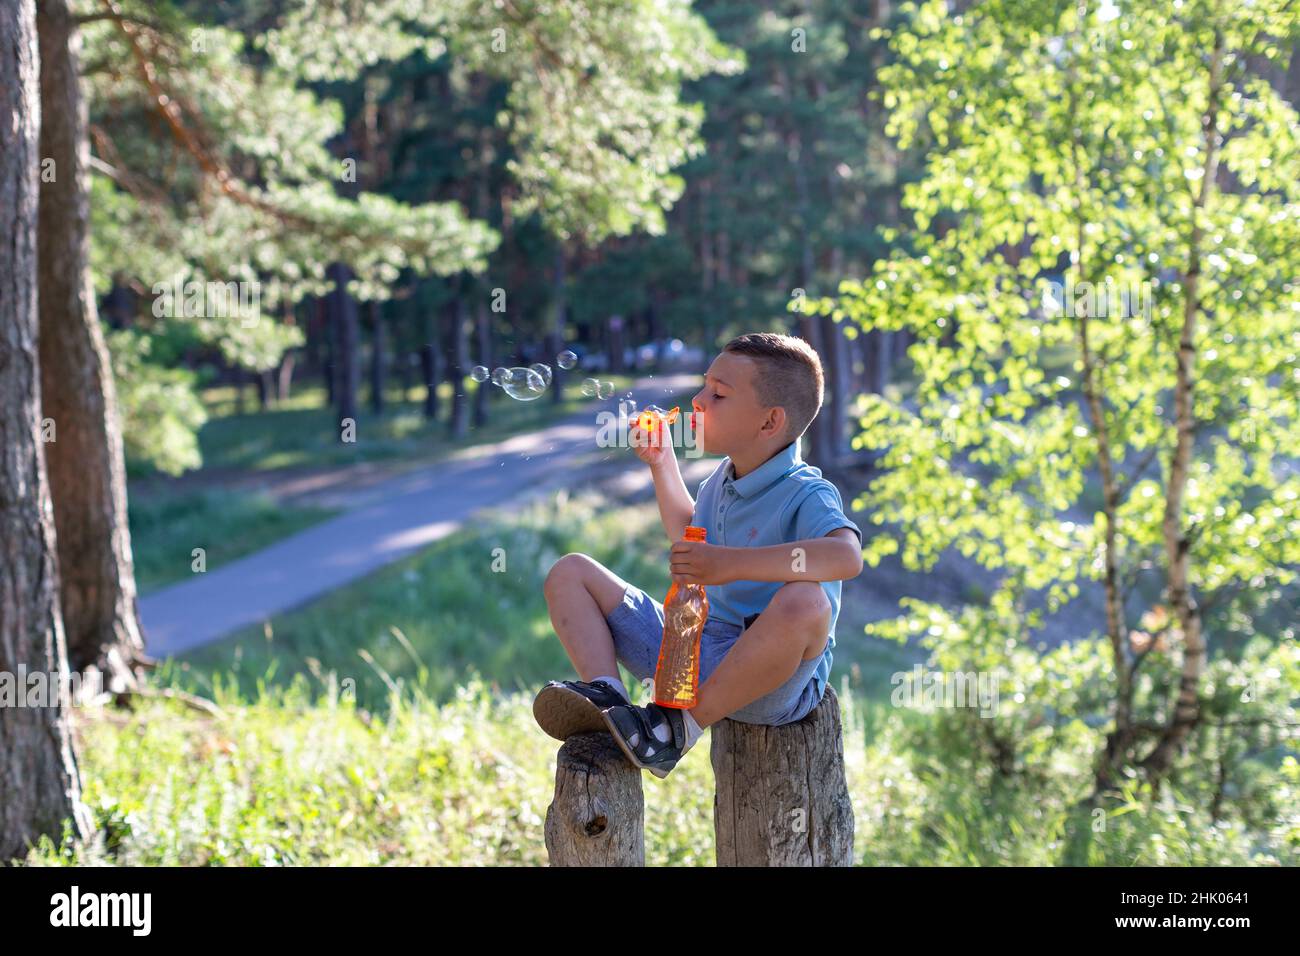 A boy sits on a tree stump in the park and blows soap bubbles Stock Photo